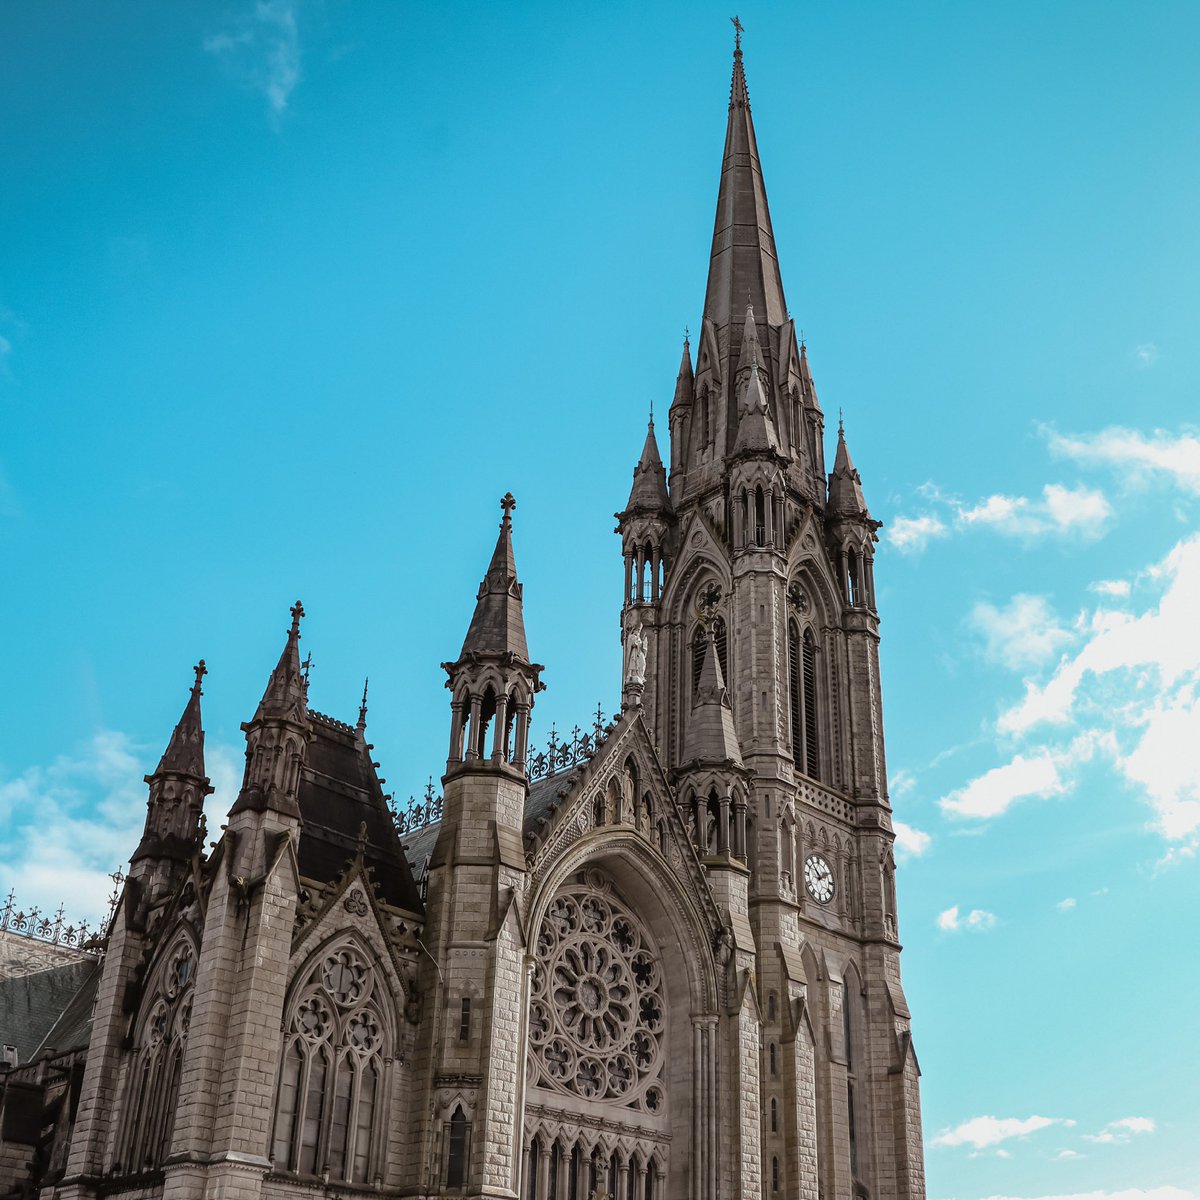 St Colman’s Cathedral Cobh. Sunny Days ☀️ 

#Cobh #Cork #PureCork #KeepDiscovering #Ireland #Church #TakeMeToChurch #EastCork #DiscoverIreland